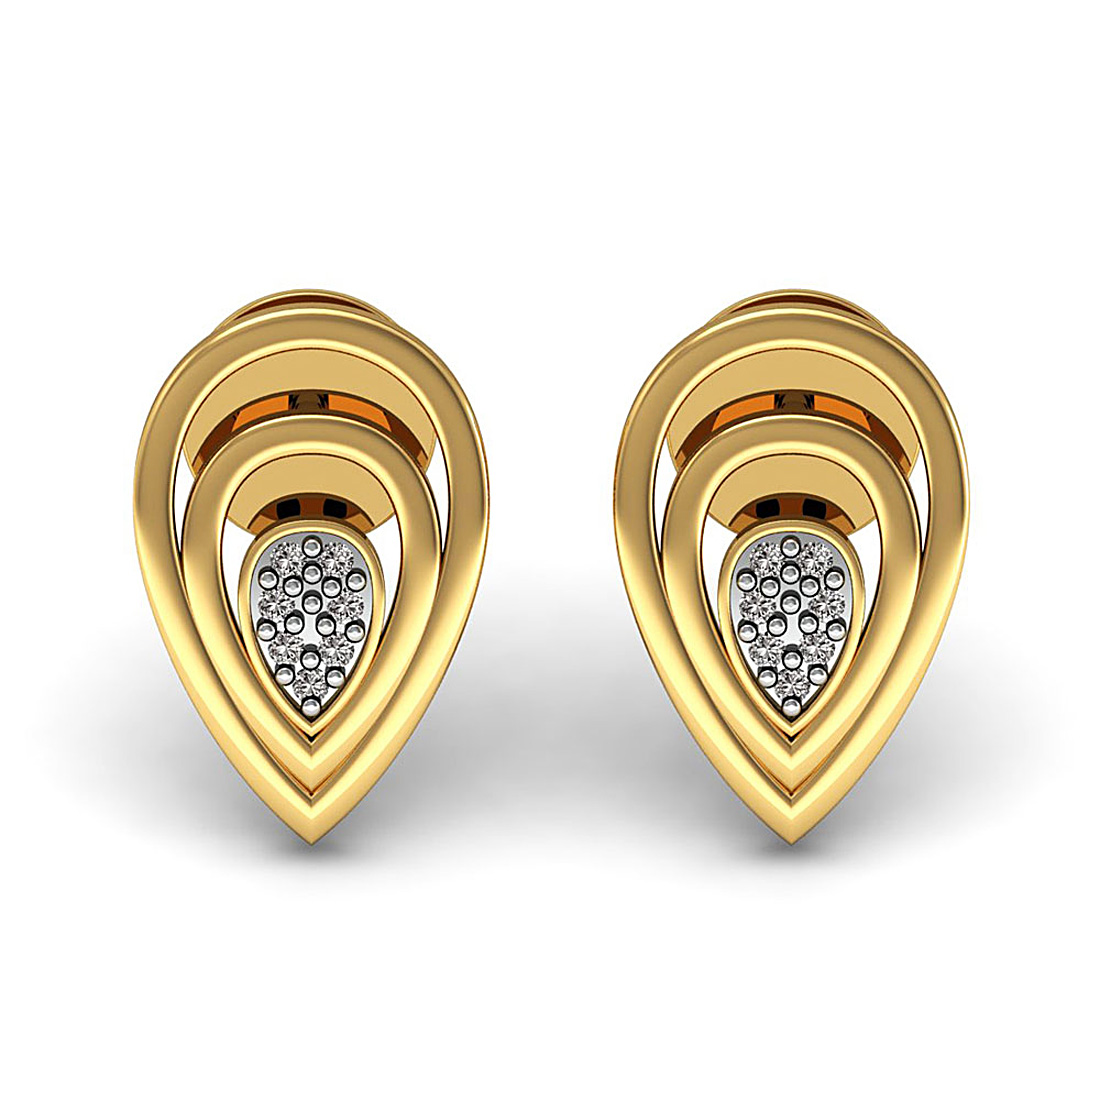 18k solid gold drop stud earrings with real diamond